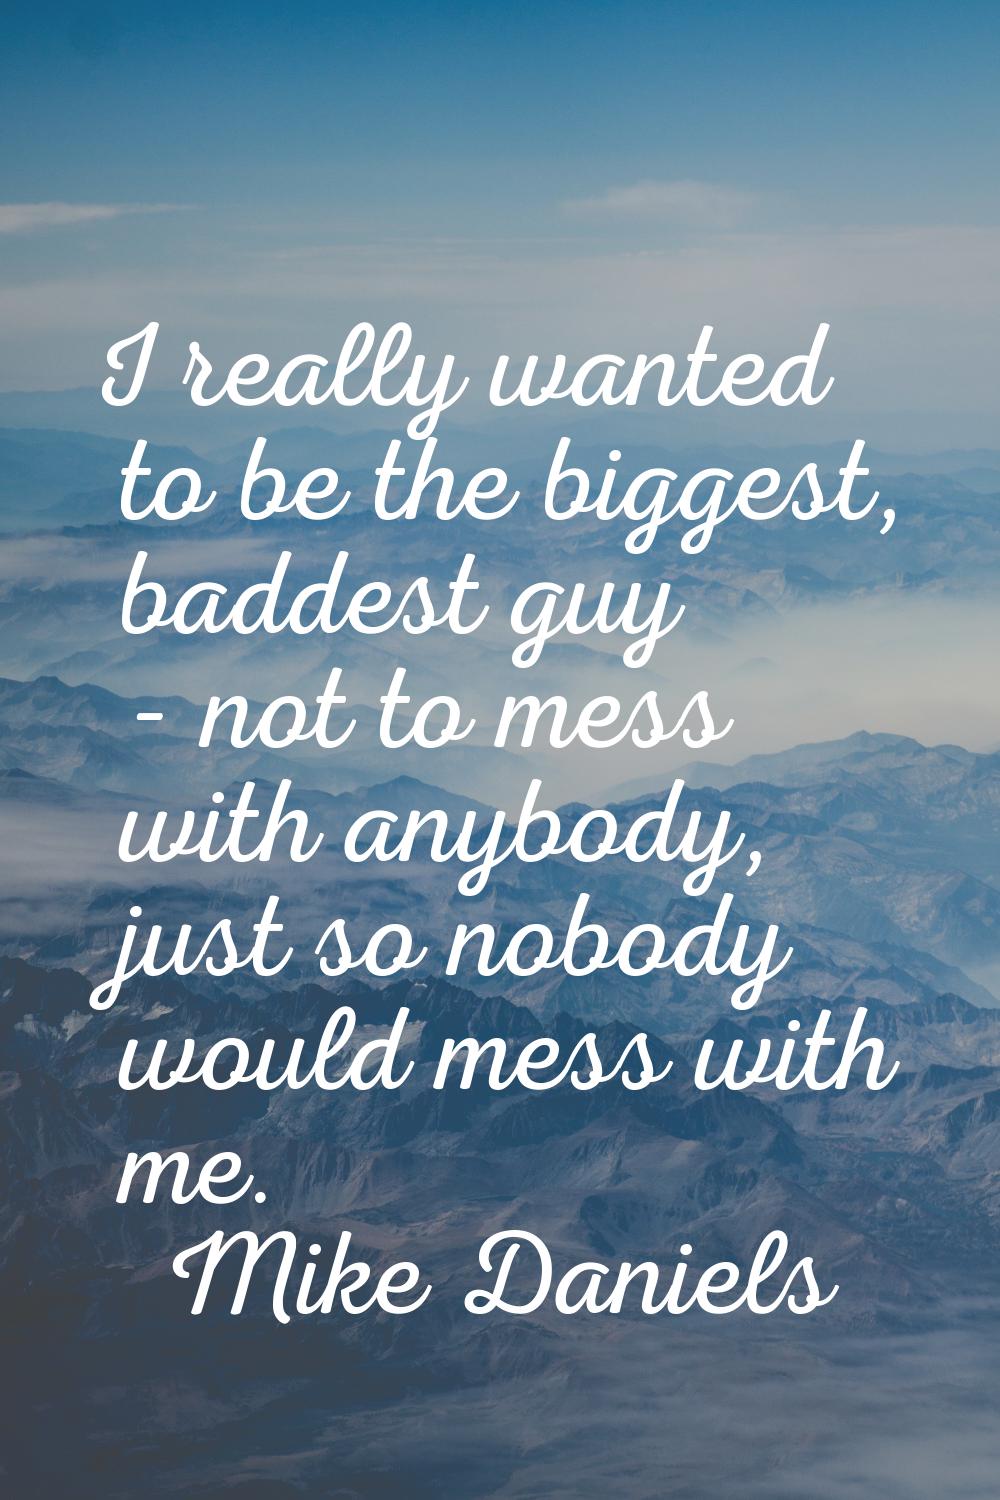 I really wanted to be the biggest, baddest guy - not to mess with anybody, just so nobody would mes